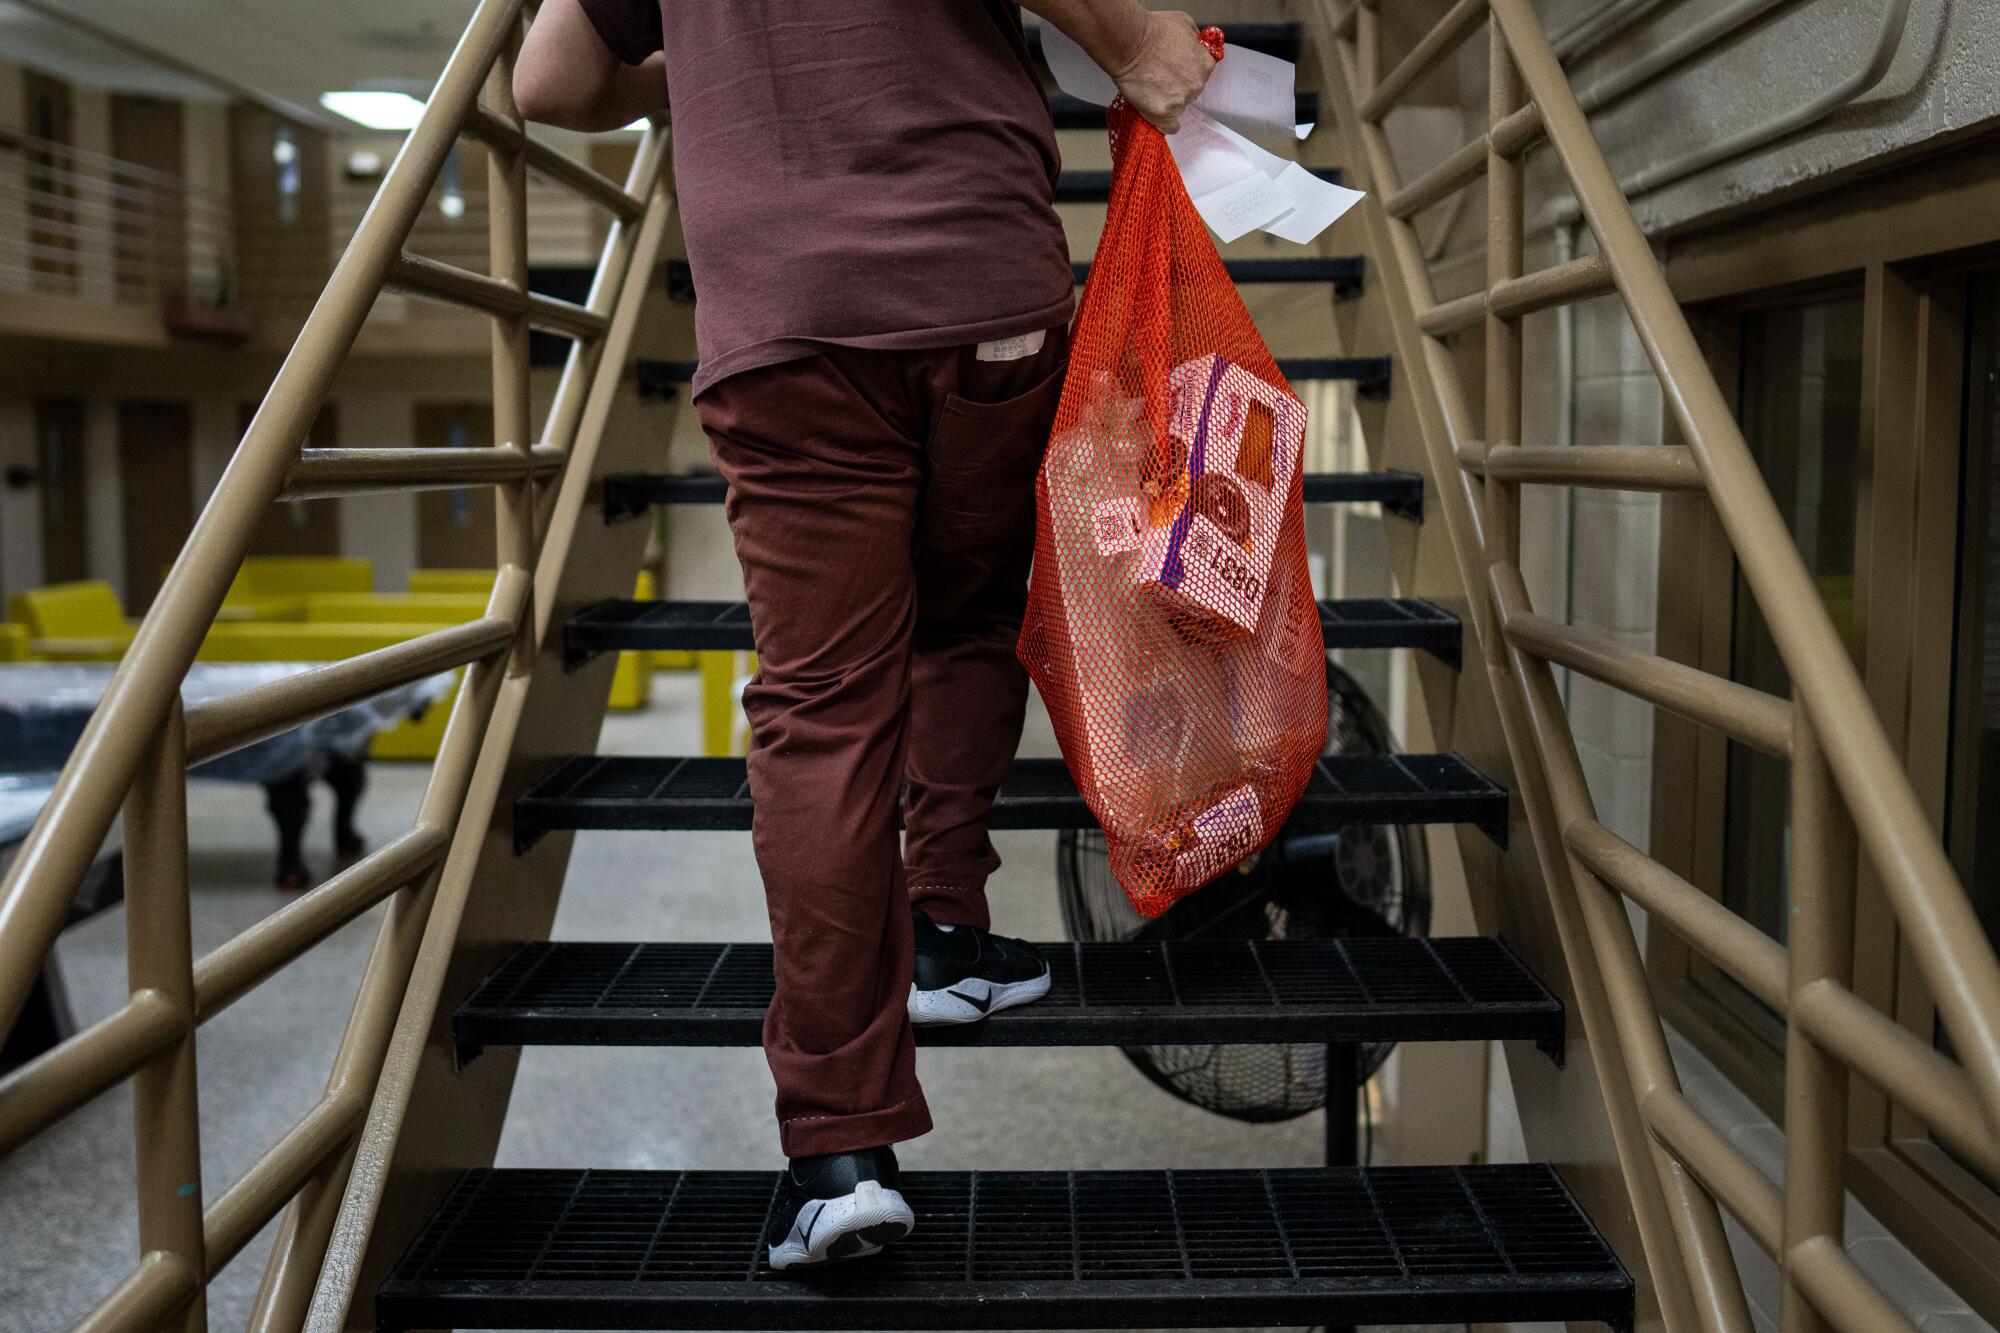 An inmate carries a bag of groceries to his cell in the "Little Scandinavia" unit.